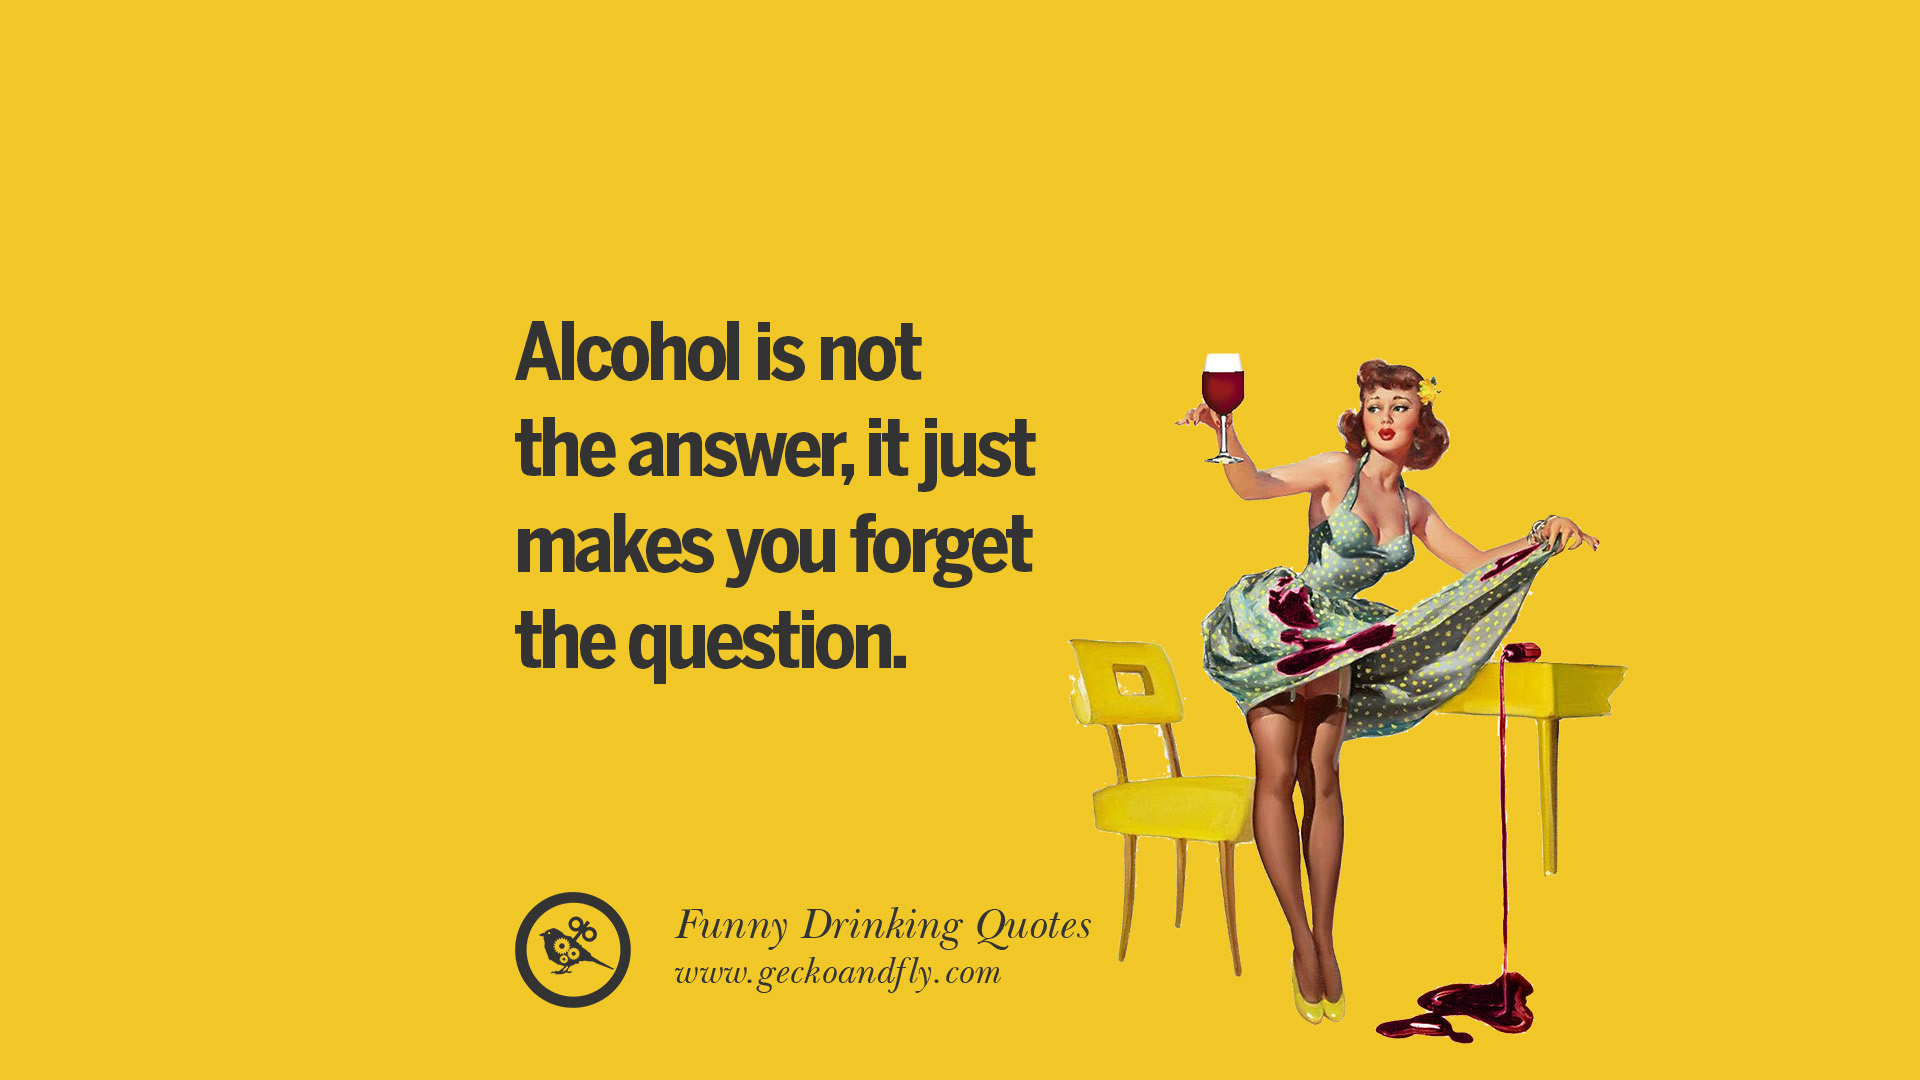 Funny quotes on drinking alcohol in